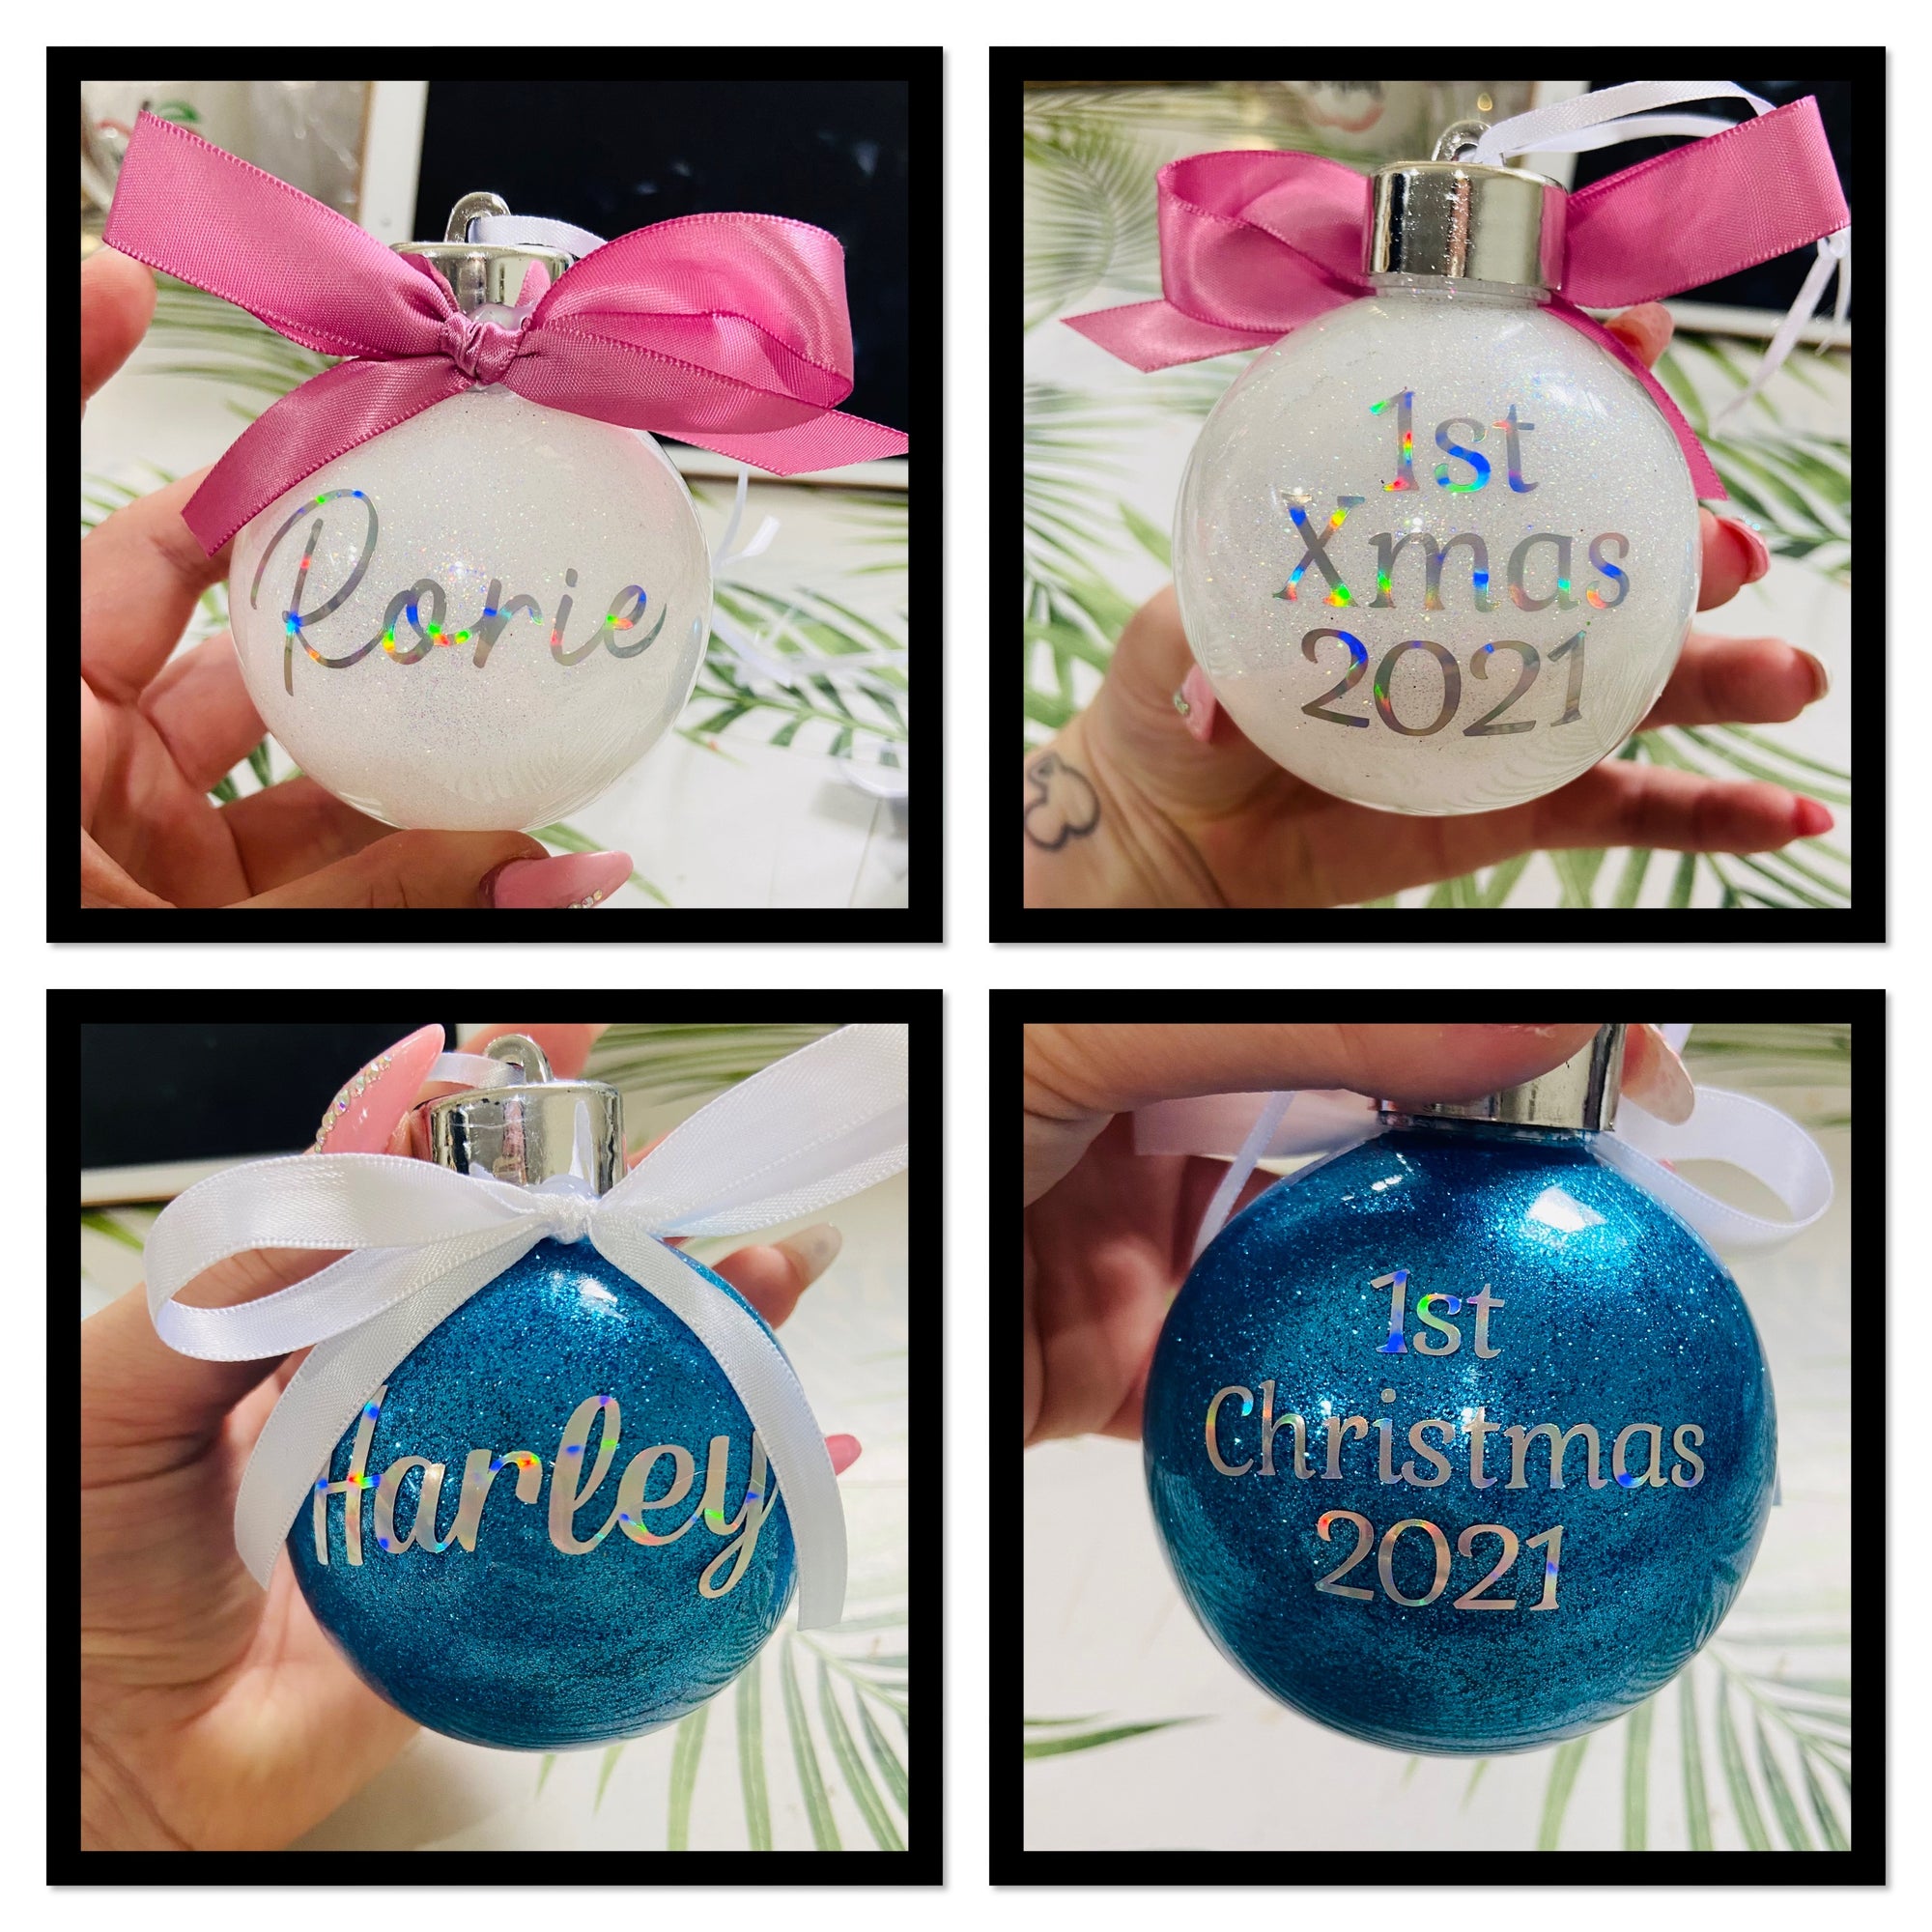 1st Christmas bauble